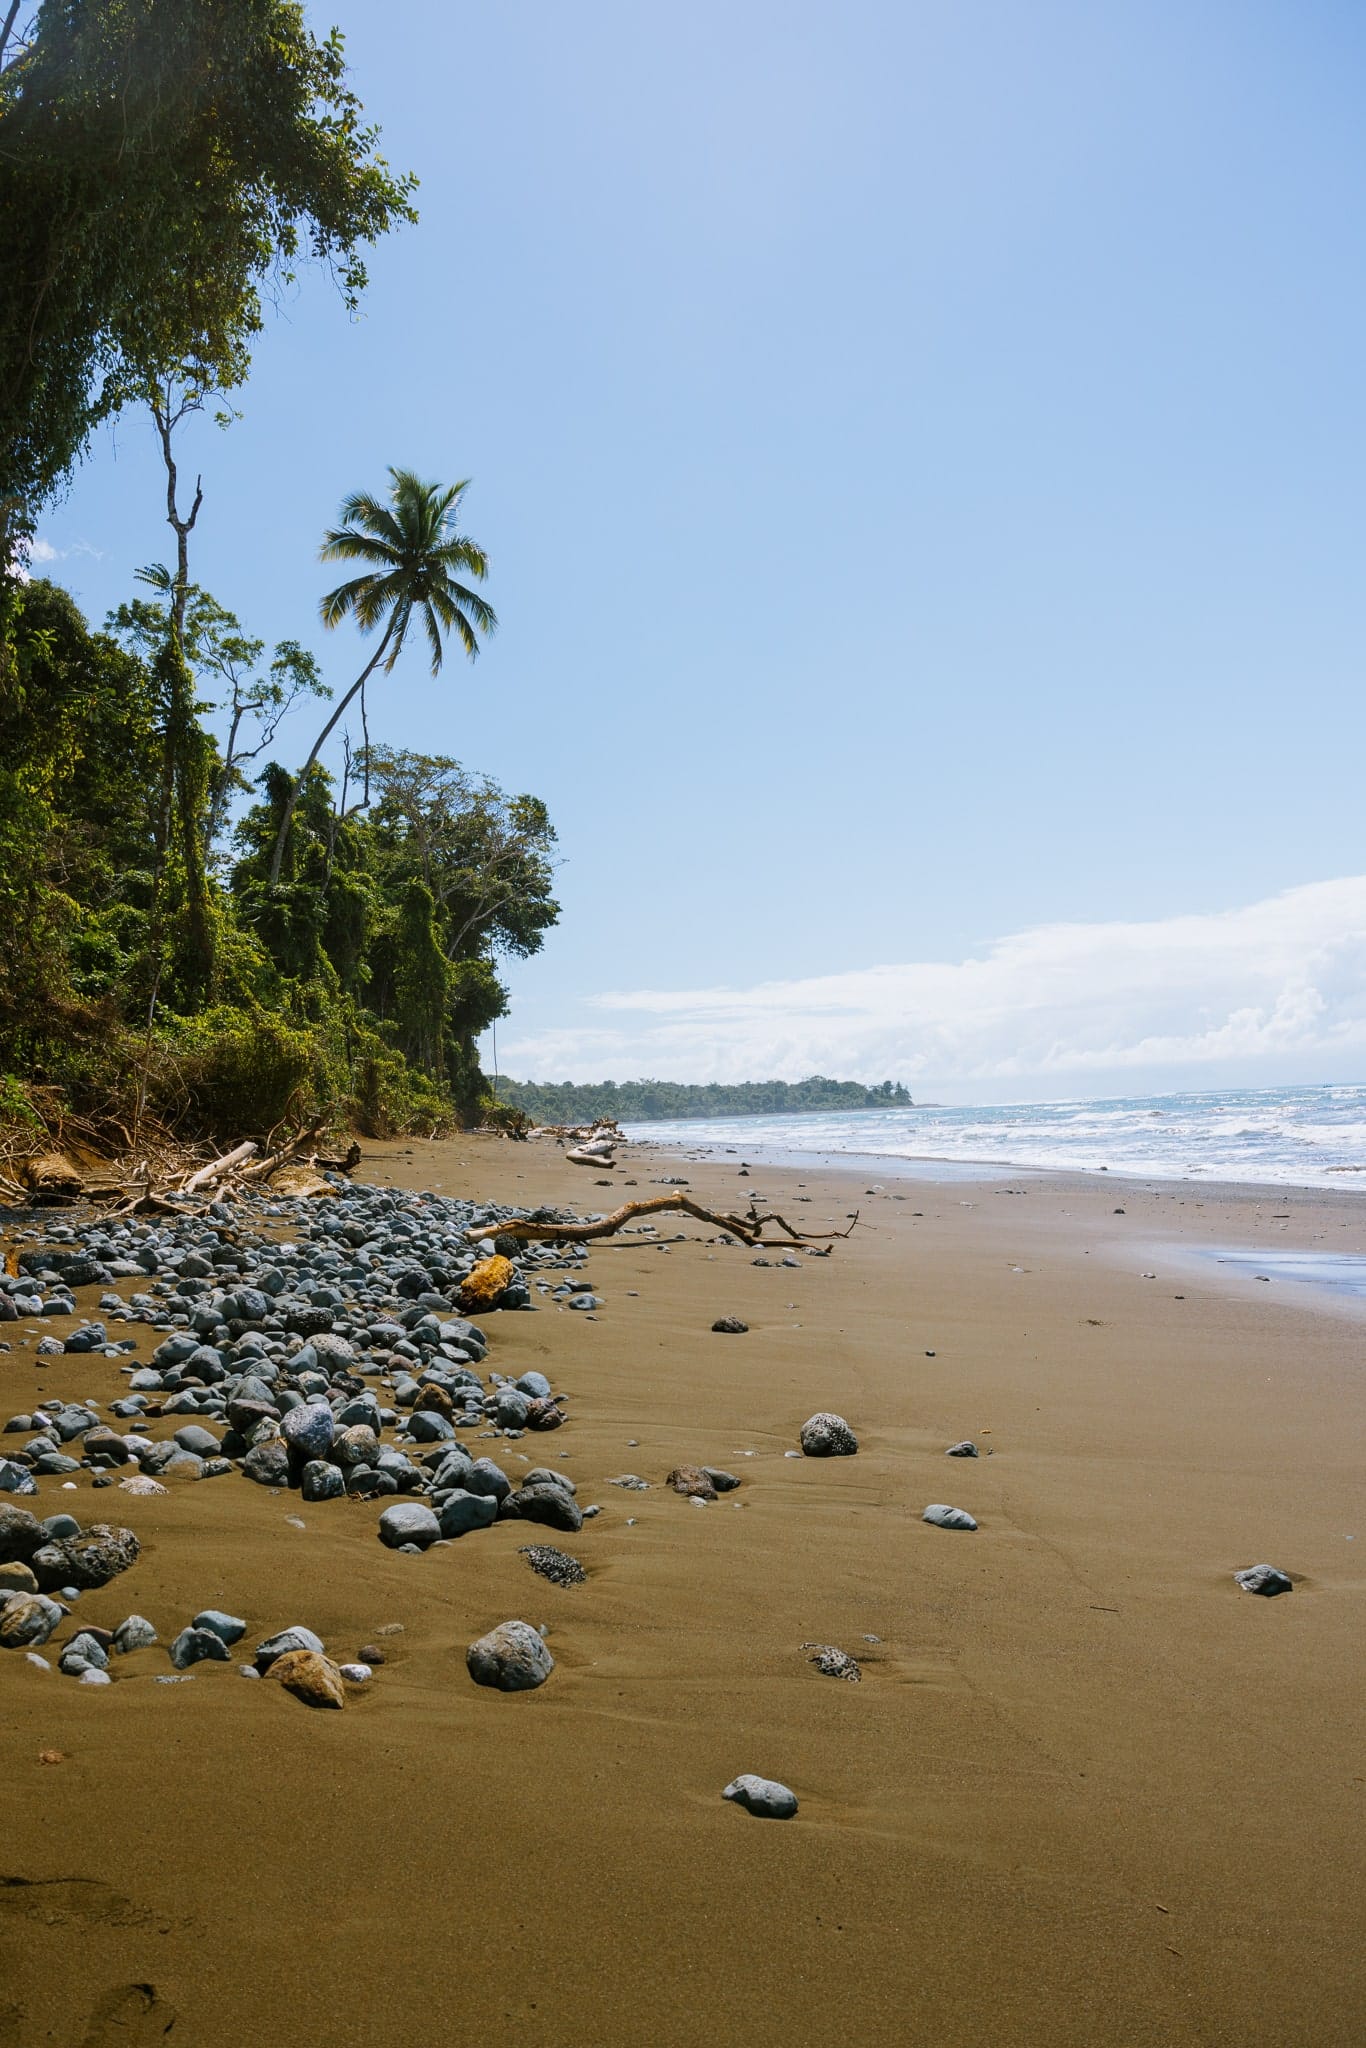 Visiting Corcovado National Park on a two week trip to Costa Rica